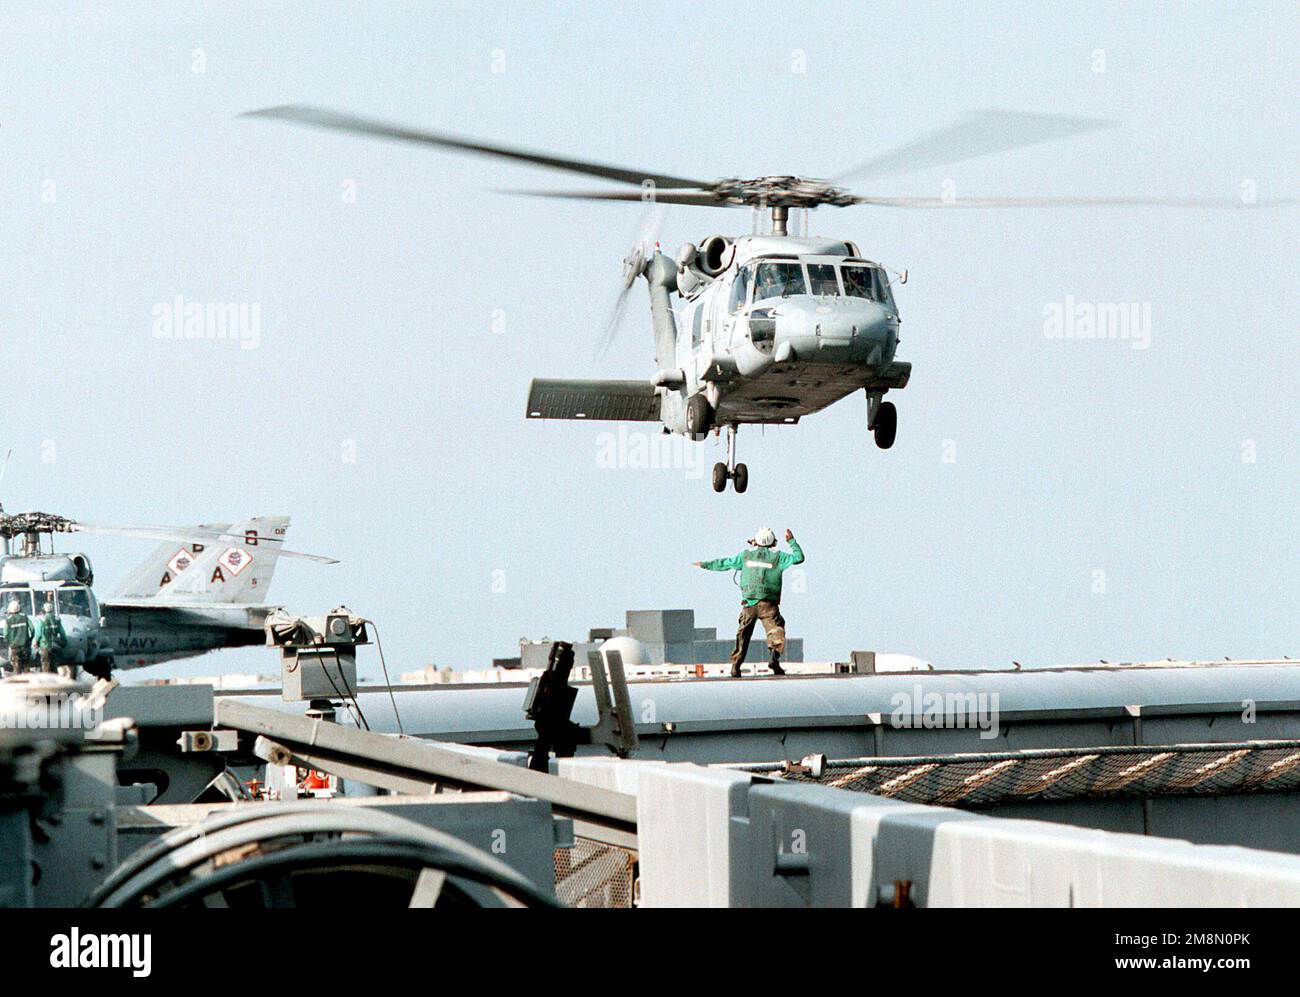 A US Navy SH-60F Sea Hawk from Helicopter Anti-Submarine Squadron Eleven (HS-11) returns to the flight deck, of the nuclear powered aircraft carrier USS GEORGE WASHINGTON (CVN 73), following another successful aircraft launch cycle. George Washington and HS-11 are in the region to enforce UN sanctions against Iraq. Operation SOUTHERN WATCH, 21 February 1998. Subject Operation/Series: SOUTHERN WATCH Base: USS George Washington (CVN 73) Stock Photo